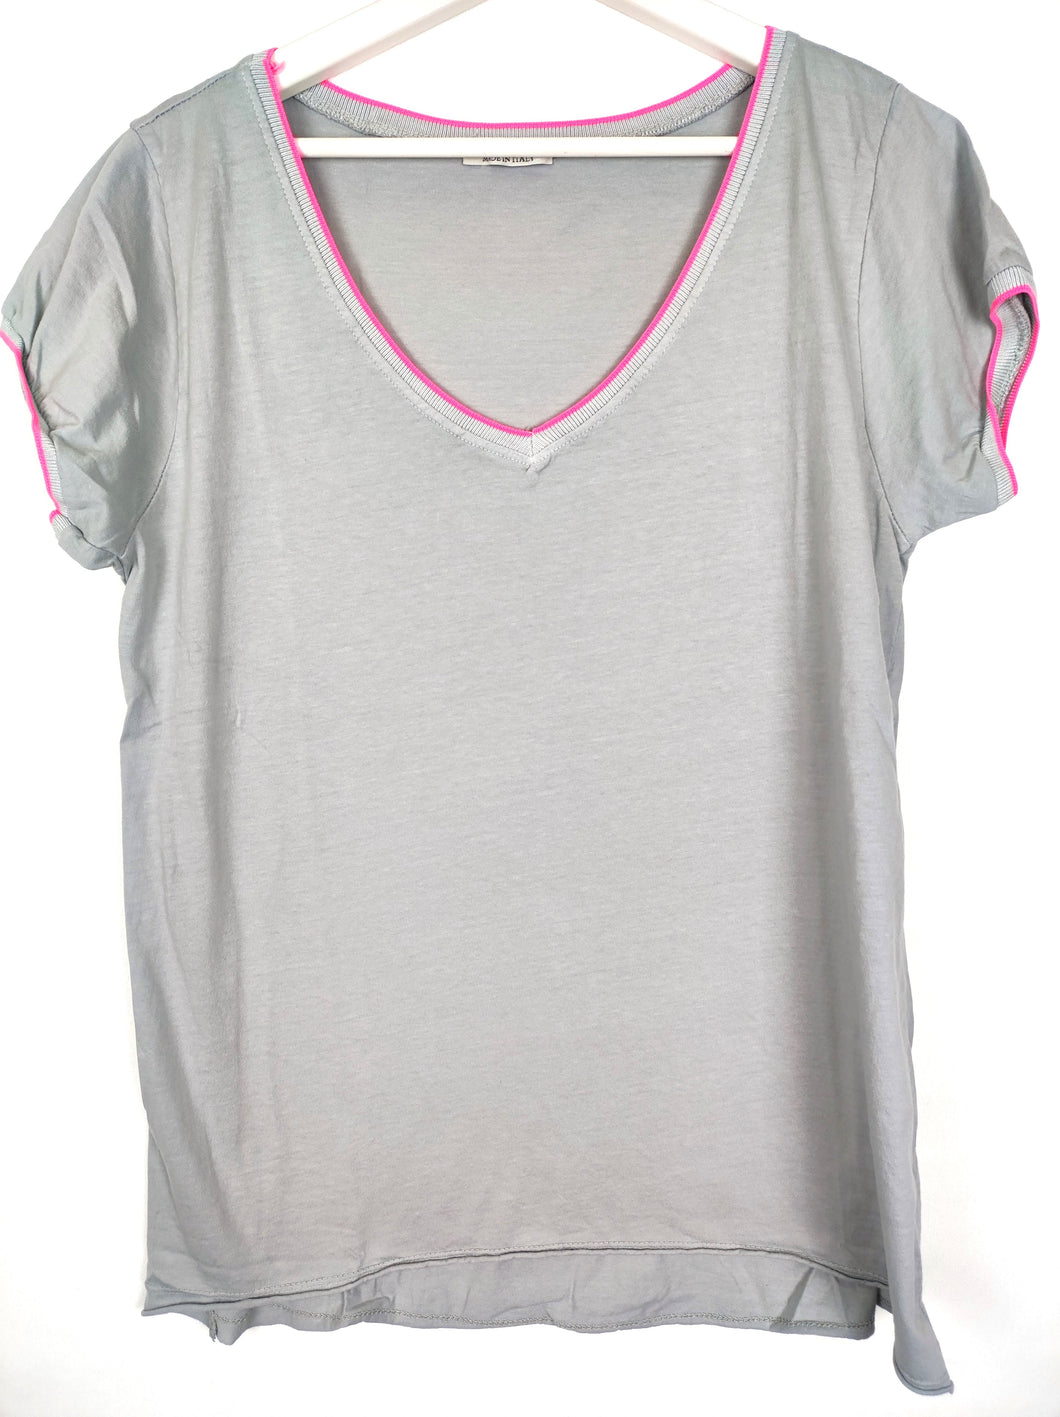 T-SHIRT PURE GREY V-NECK ONE SIZE